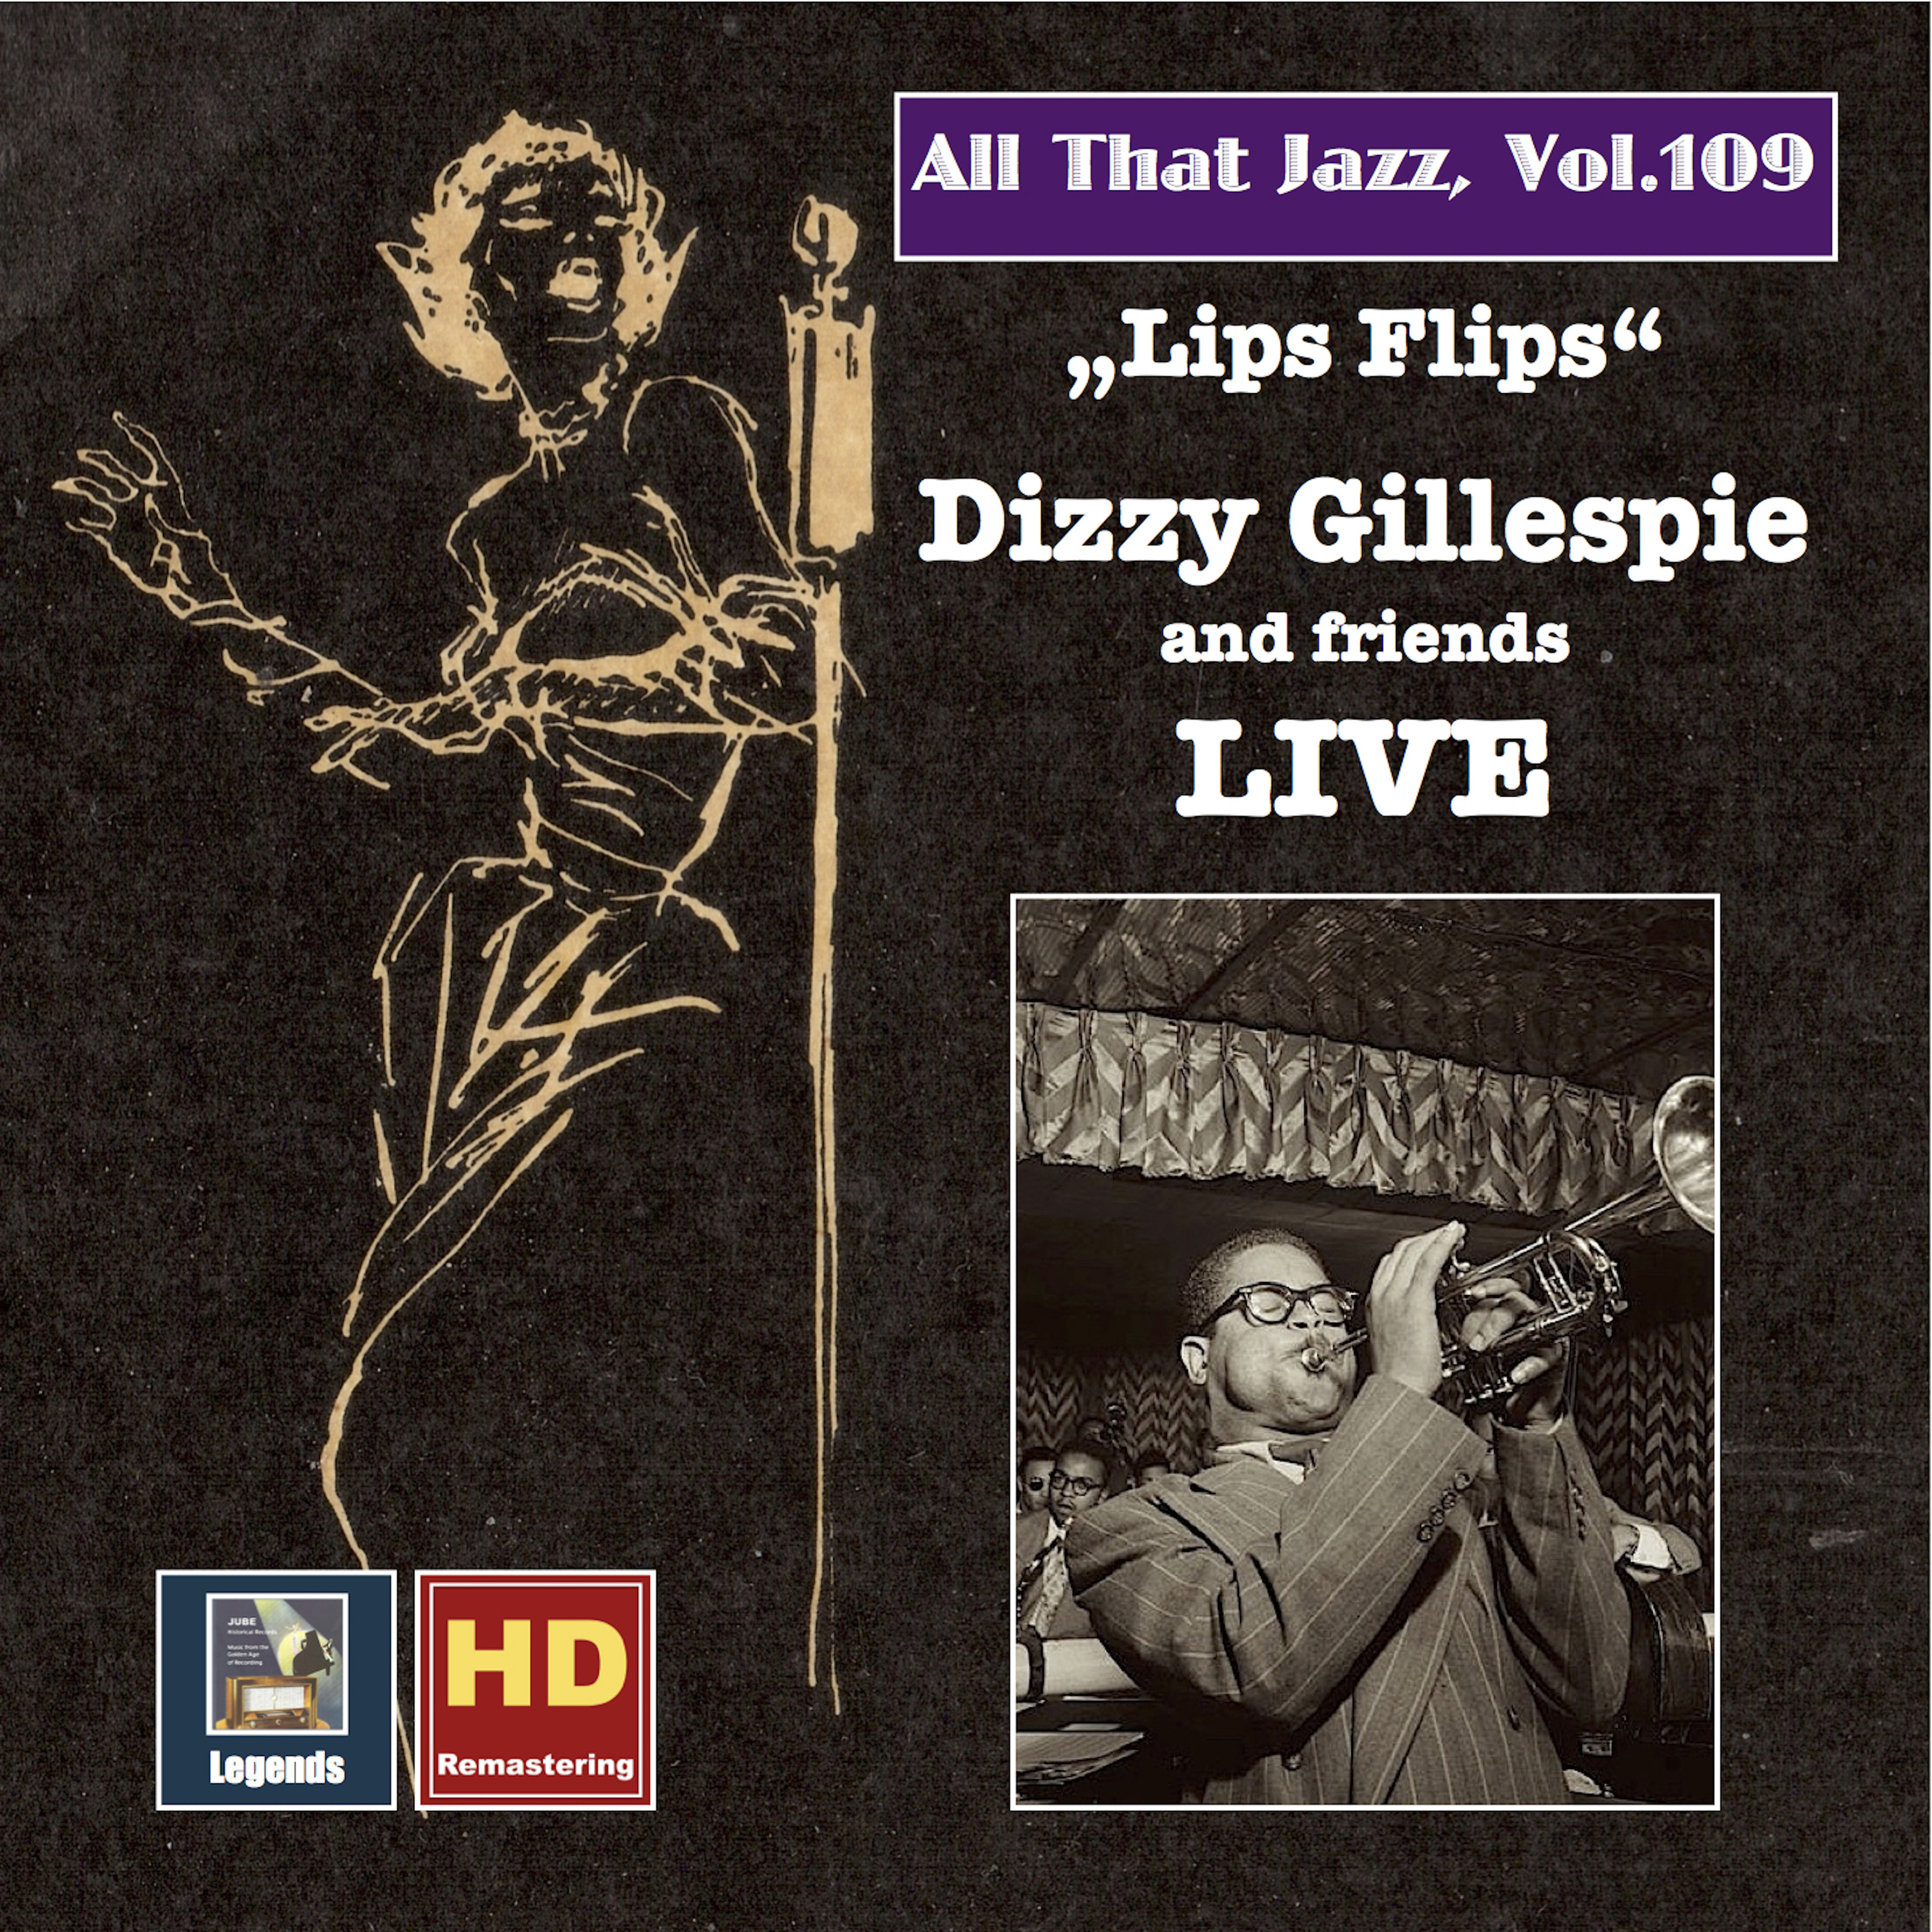 All That Jazz, Vol. 109: Lips Flips  Dizzy Gillespie and Friends Live Remastered 2018